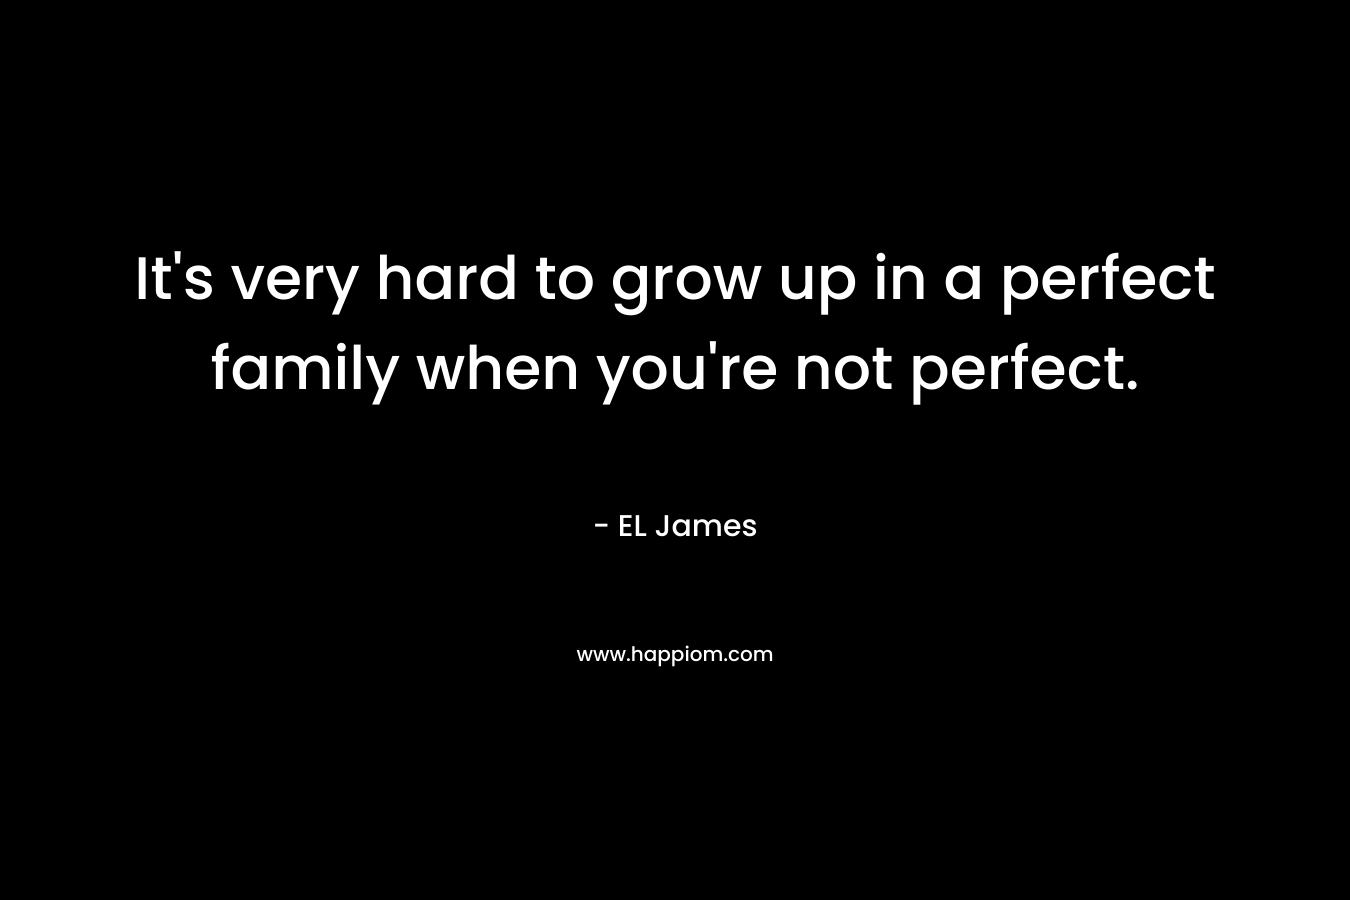 It’s very hard to grow up in a perfect family when you’re not perfect. – EL James